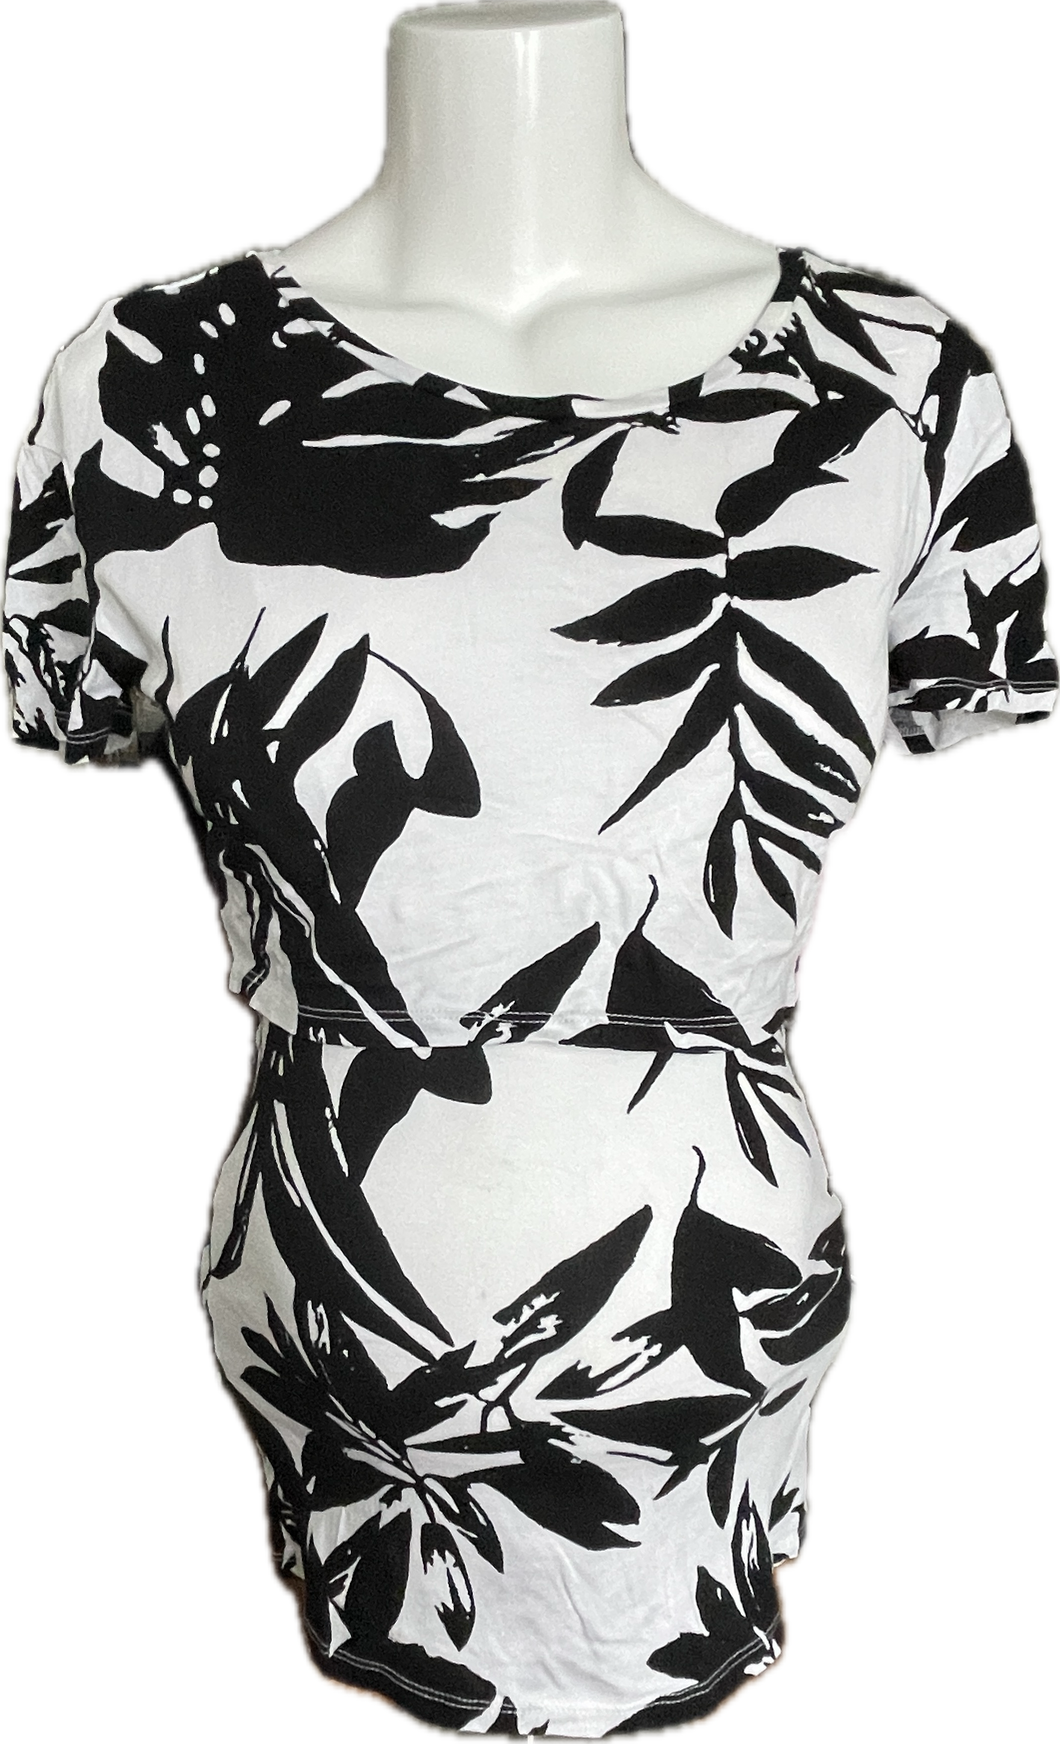 M Thyme Maternity feeding Top in Black and White print